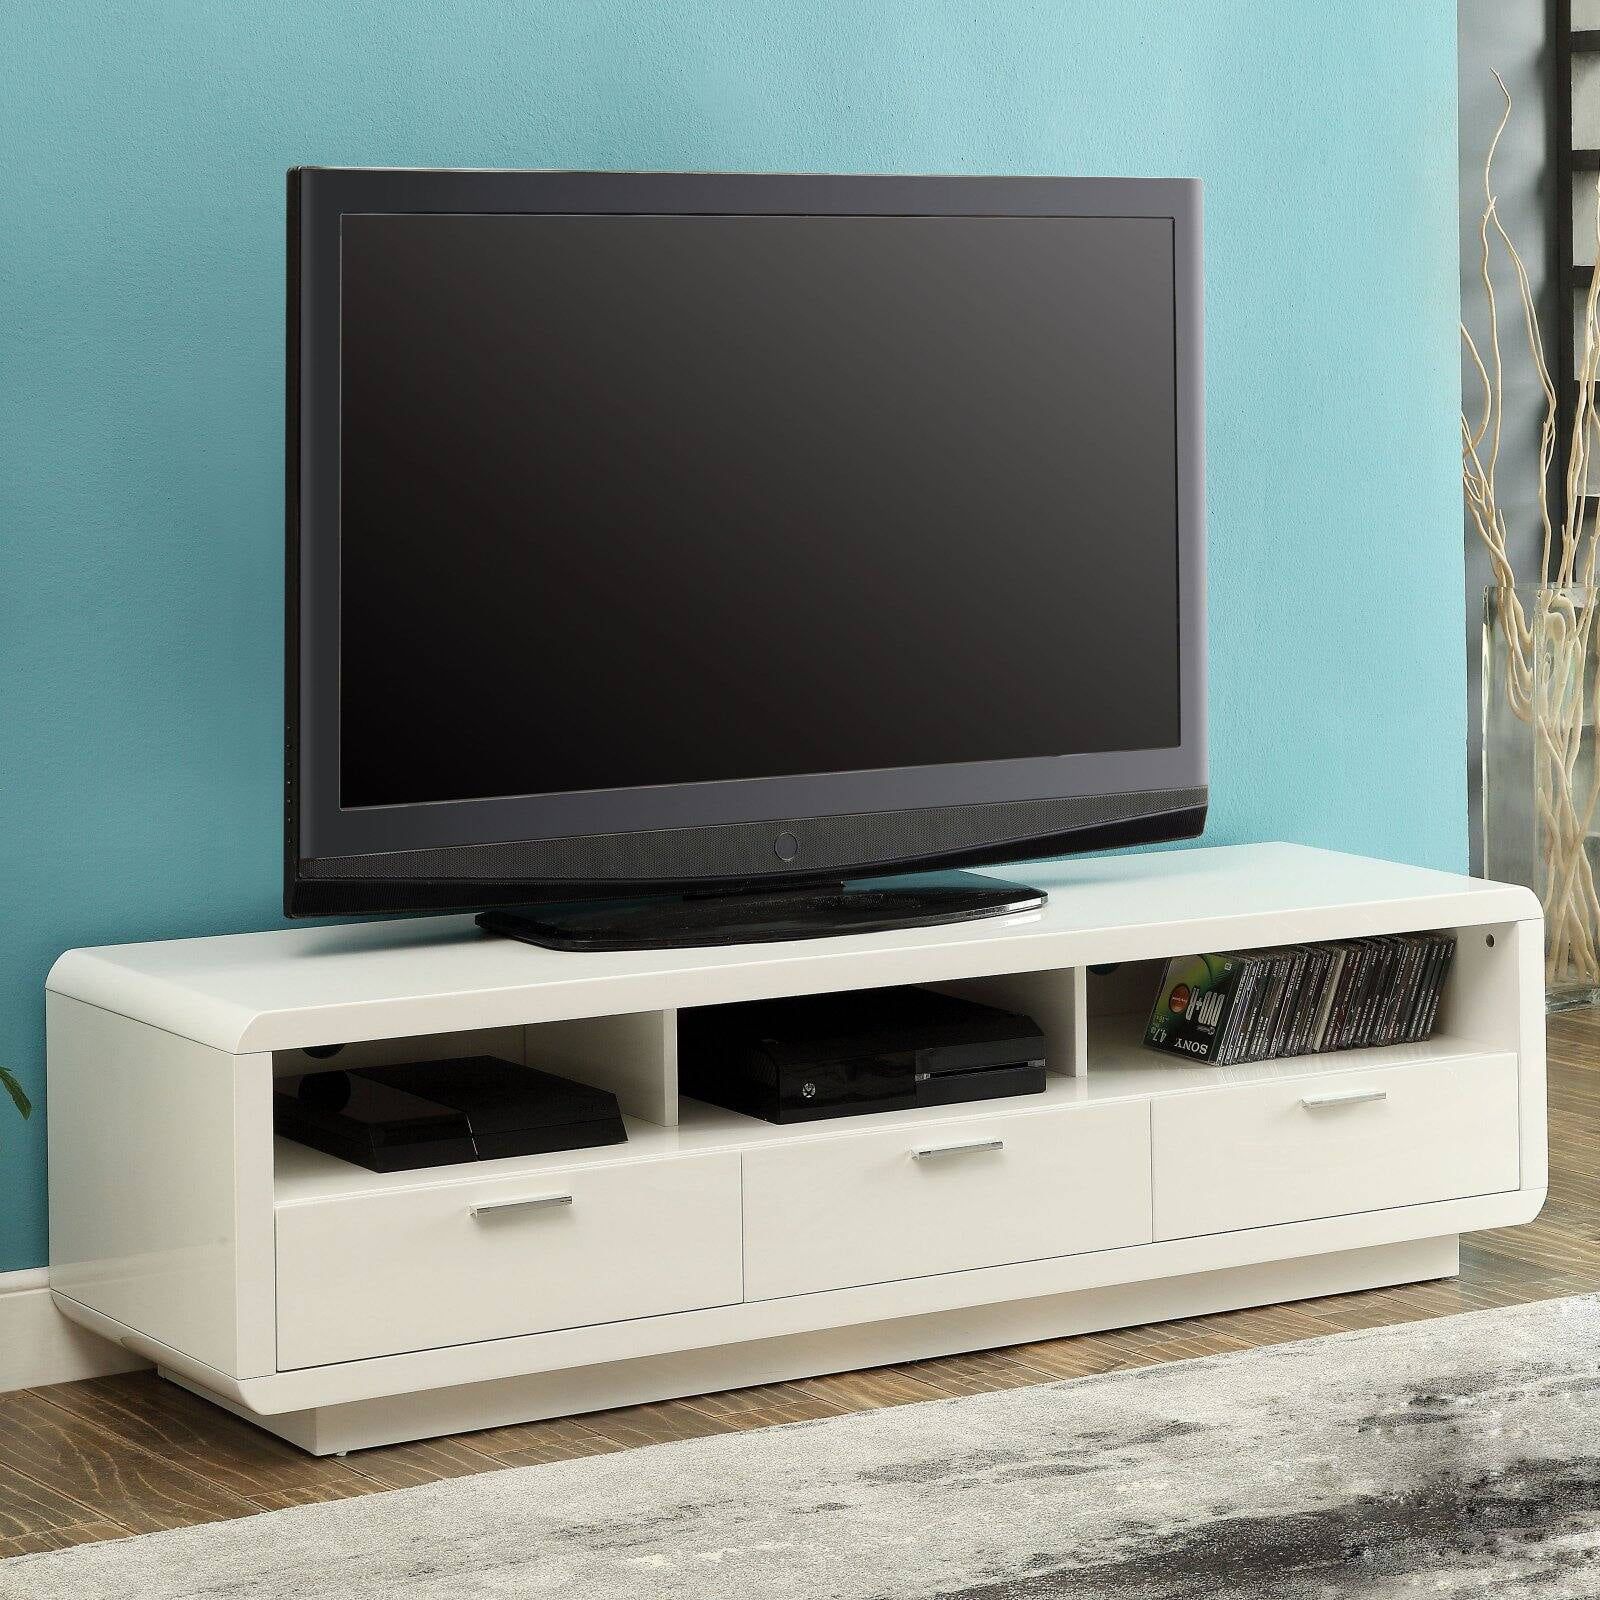 Acme Randell White Tv Stand For Flat Screen Tvs Up To 60" – Walmart Within Stand For Flat Screen (Gallery 12 of 20)